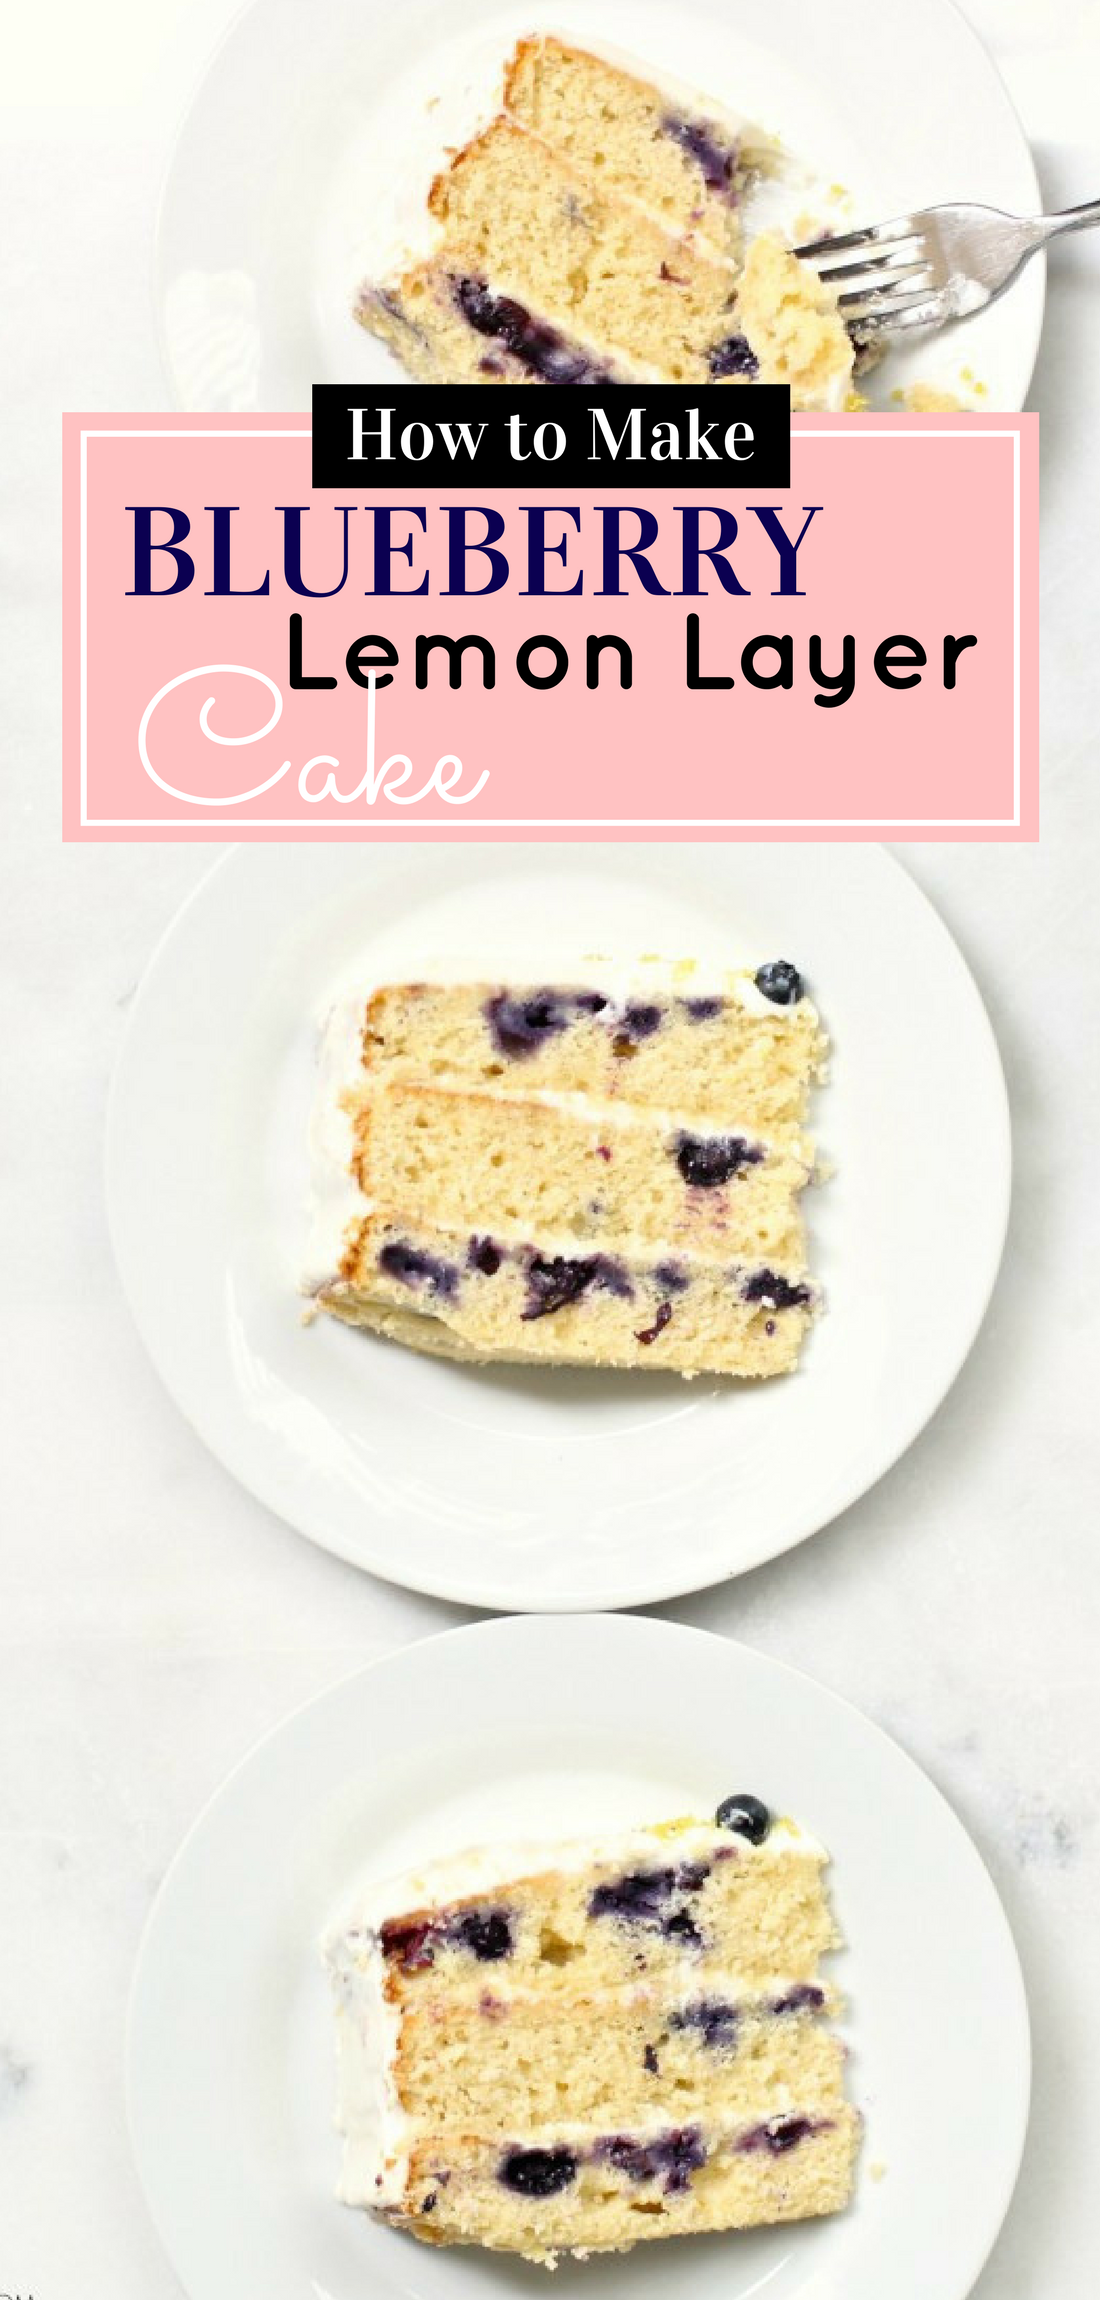 Three layers of moist, lemony cake, speckled with bursting blueberries, and spread with a melt-in-your-mouth icing. A ridiculously decadent cake that tastes light and summery all at the same time. Click through for the recipe. | glitterinc.com | @glitterinc